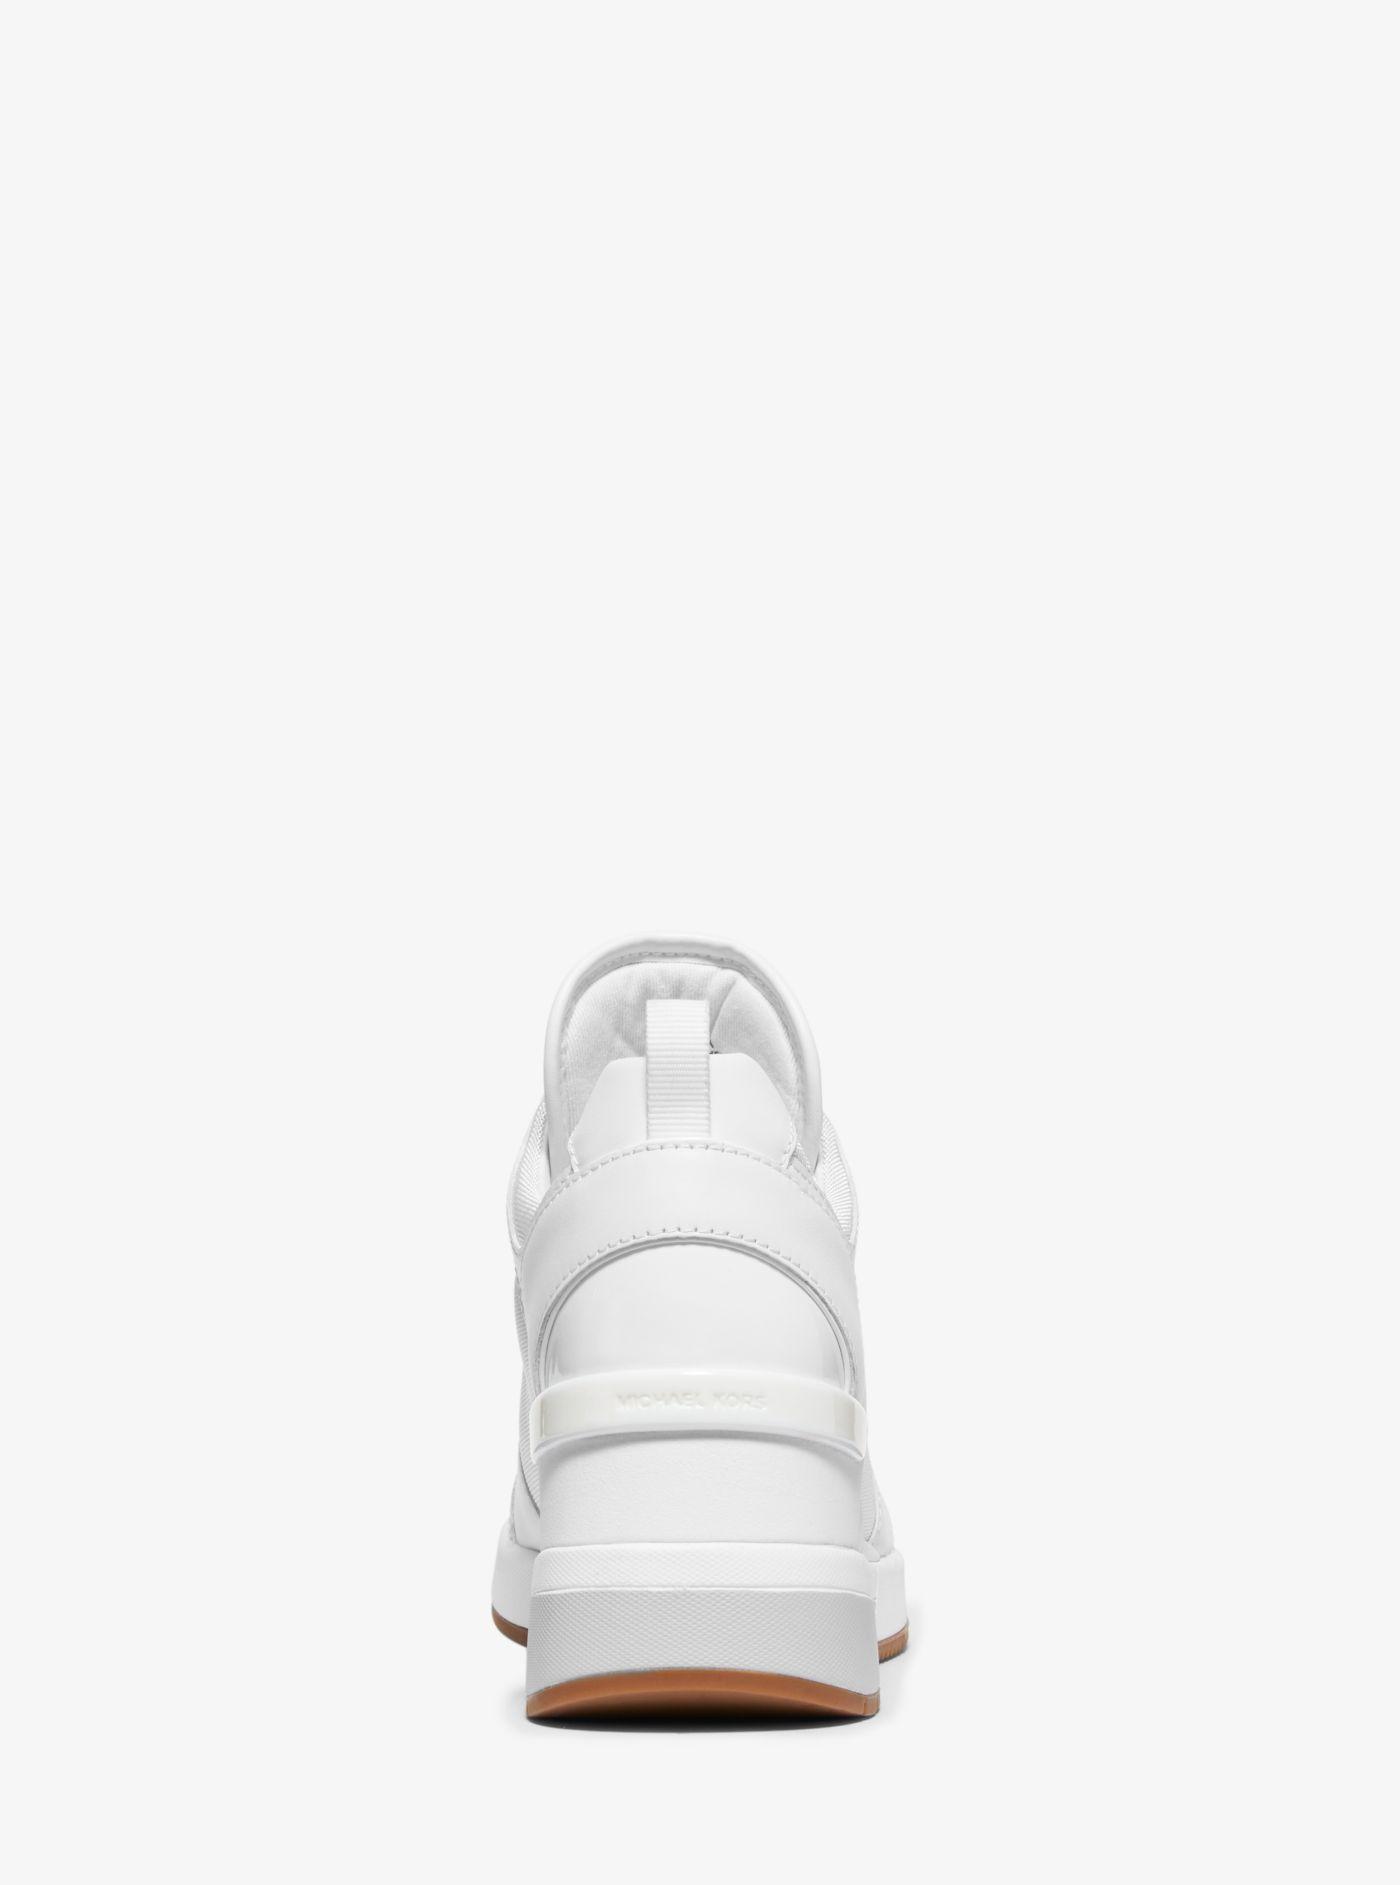 Michael Kors Georgie Leather And Canvas Trainer in White | Lyst